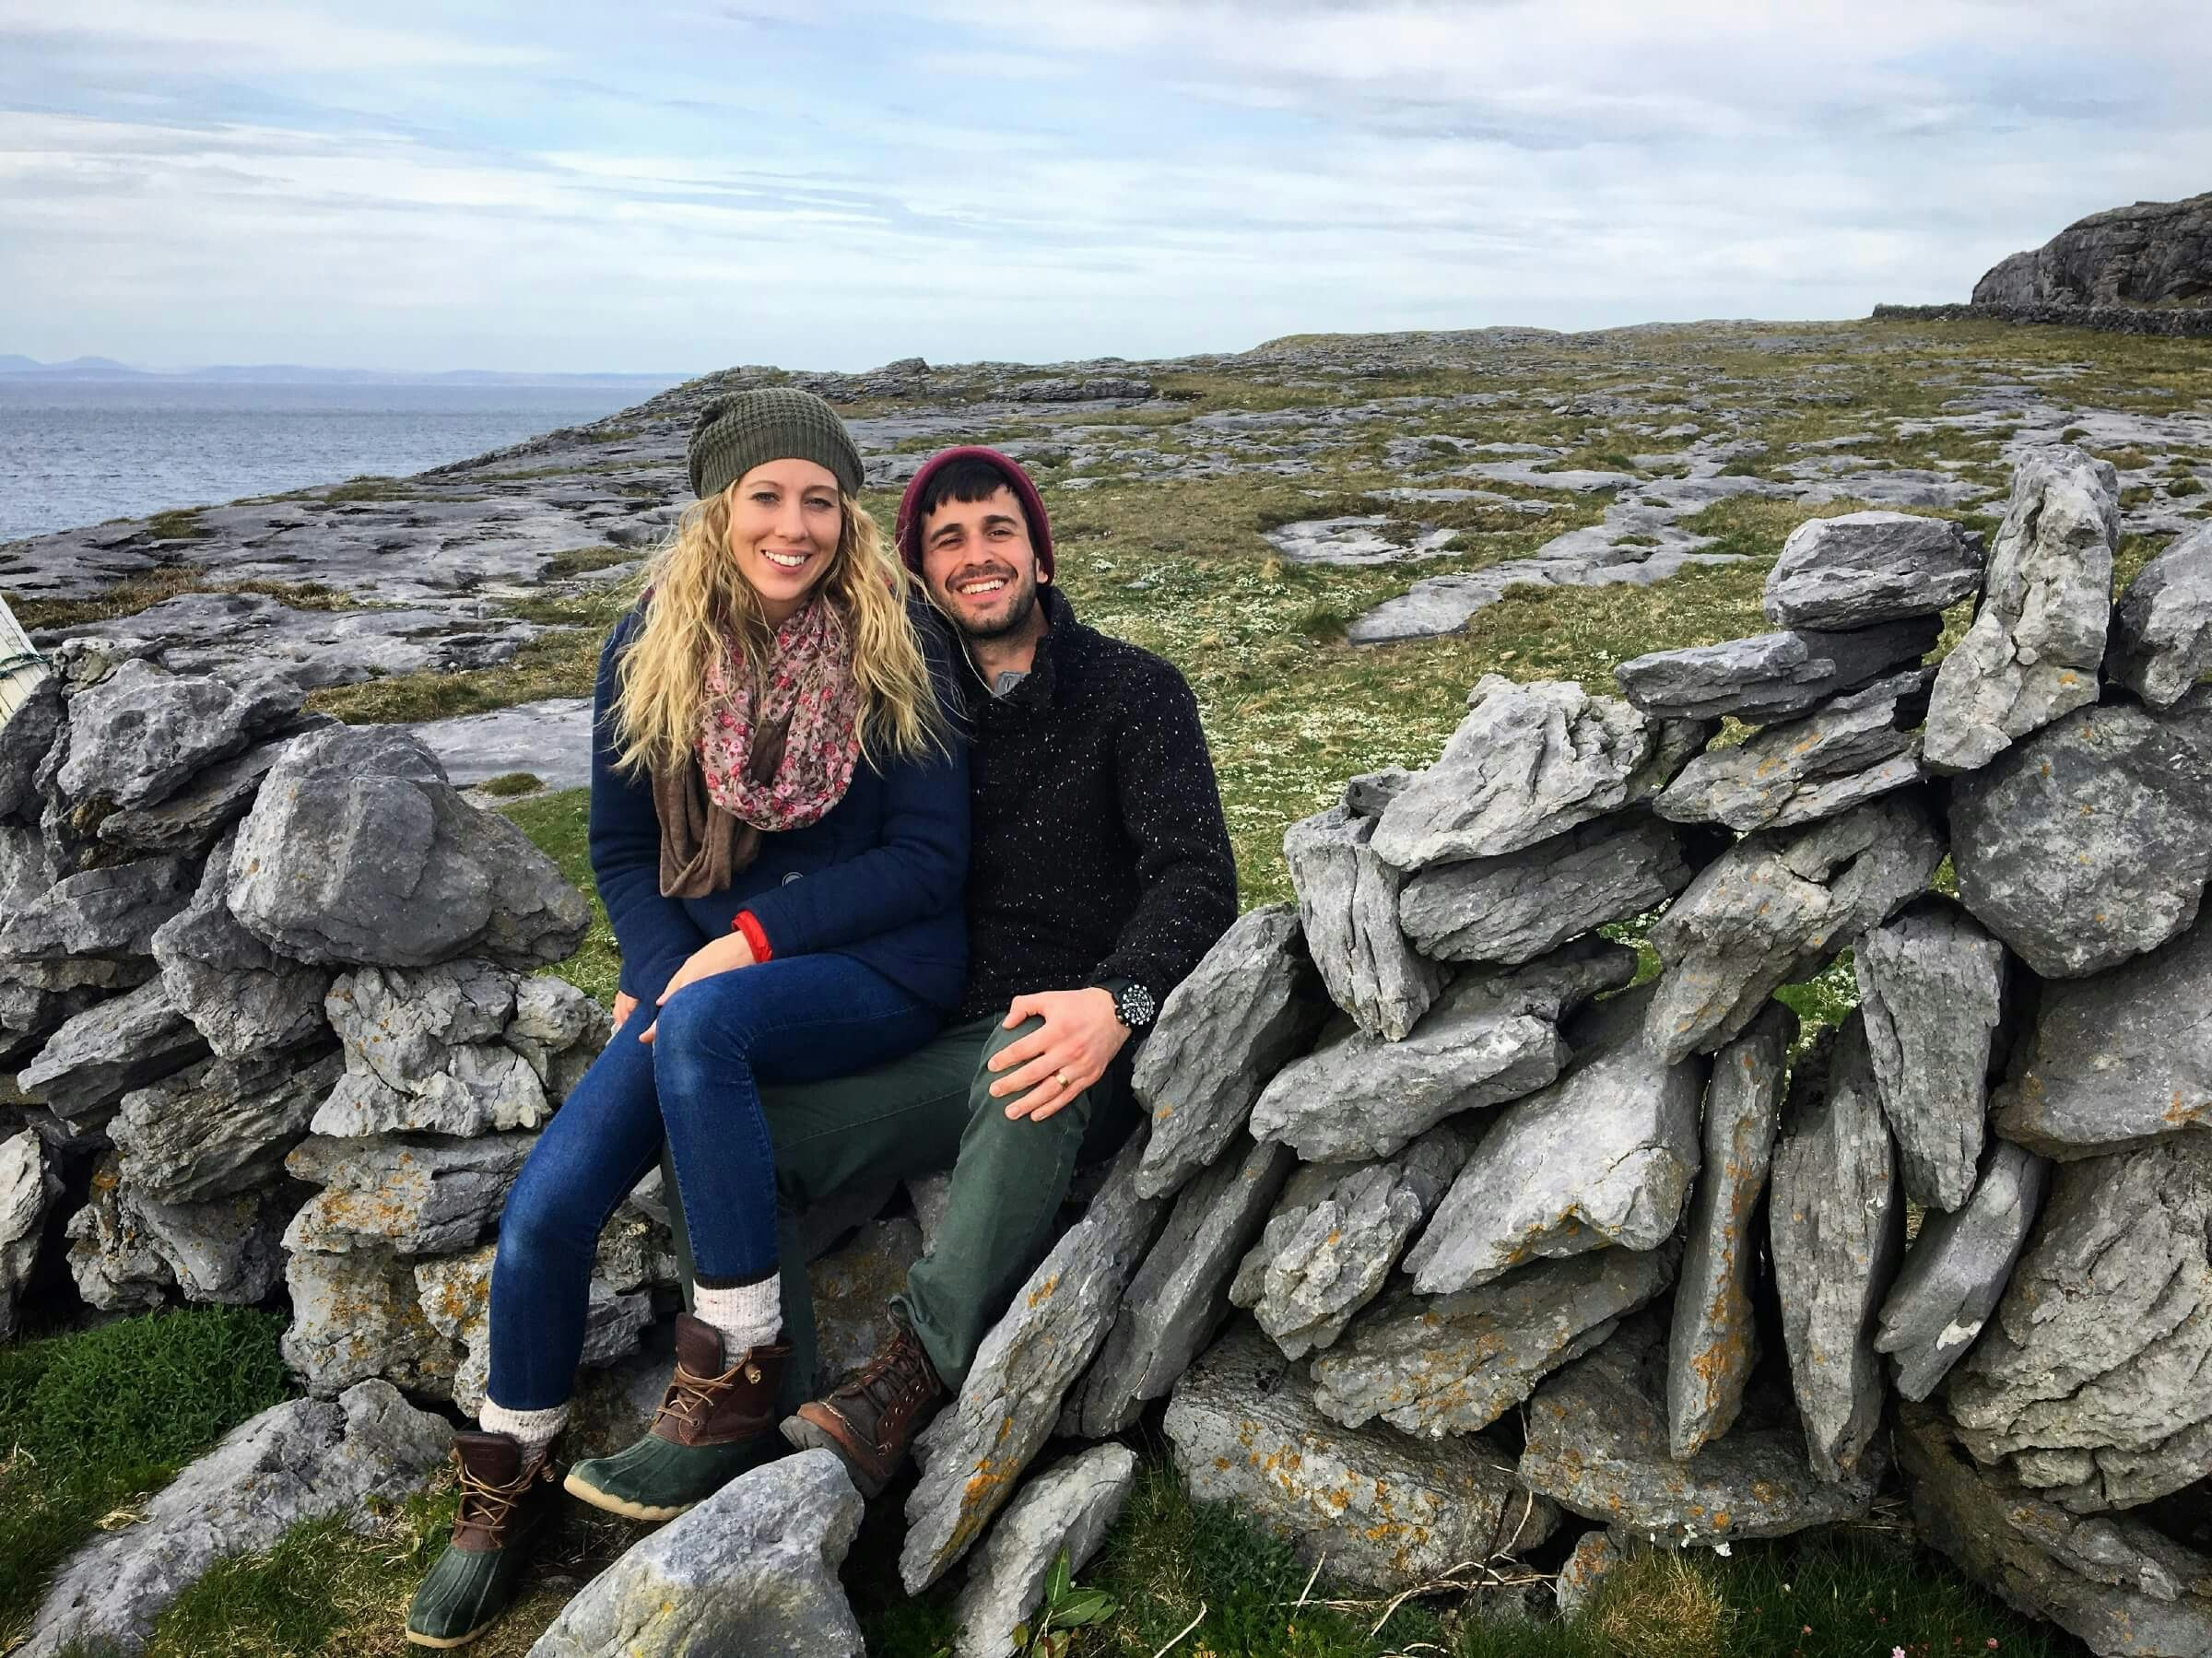 Portrait of smiling man and woman sitting on rocks against cloudy sky in Ireland, Ennis.